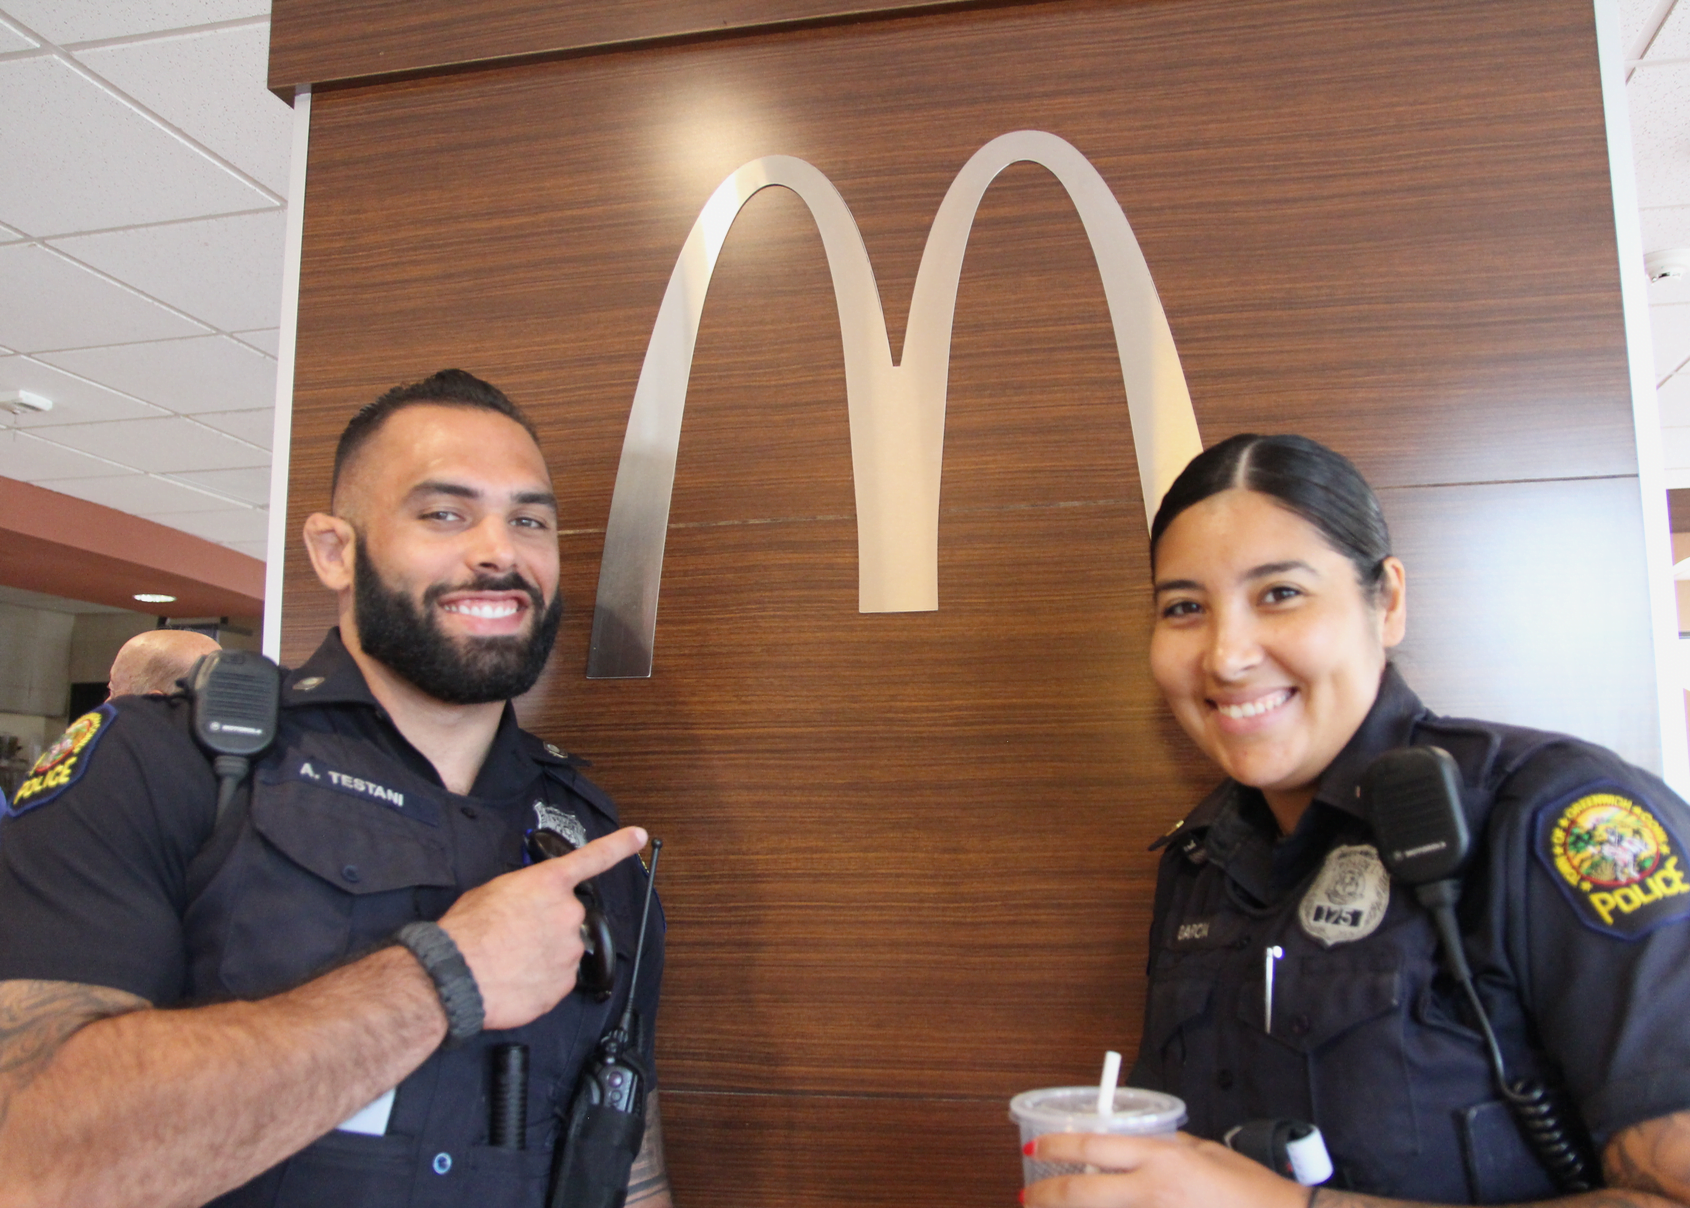 Officer Alex Testani and Officer Ericka Garcia at McDonald's on West Putnam Avenue for the Coffee with a Cop event. July 11, 2018 Photo: Leslie Yager